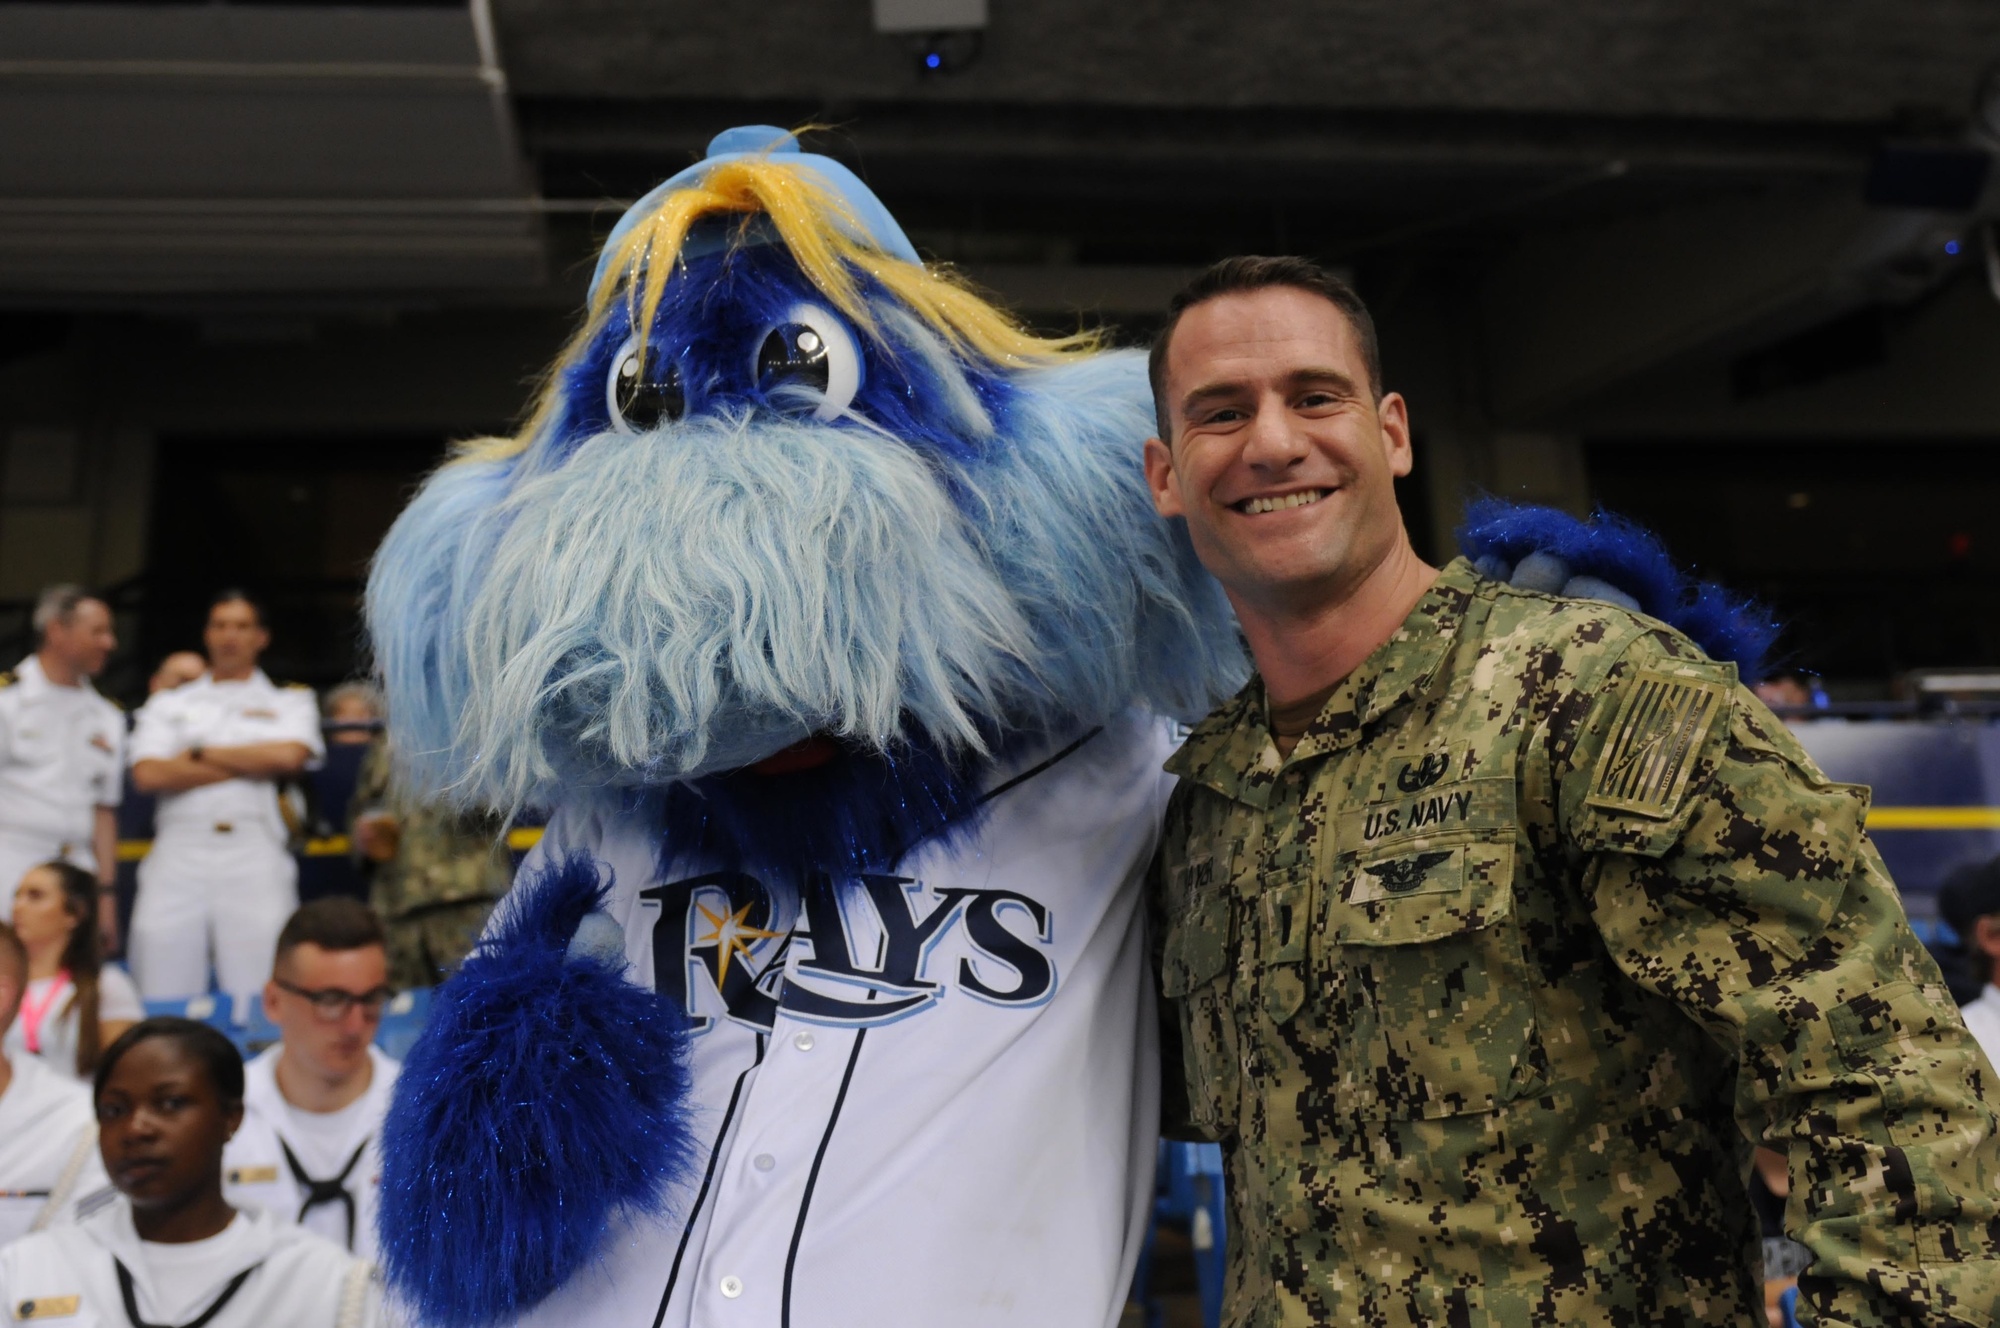 DVIDS - Images - Tampa Bay Rays Mascot and US Sailor [Image 4 of 4]